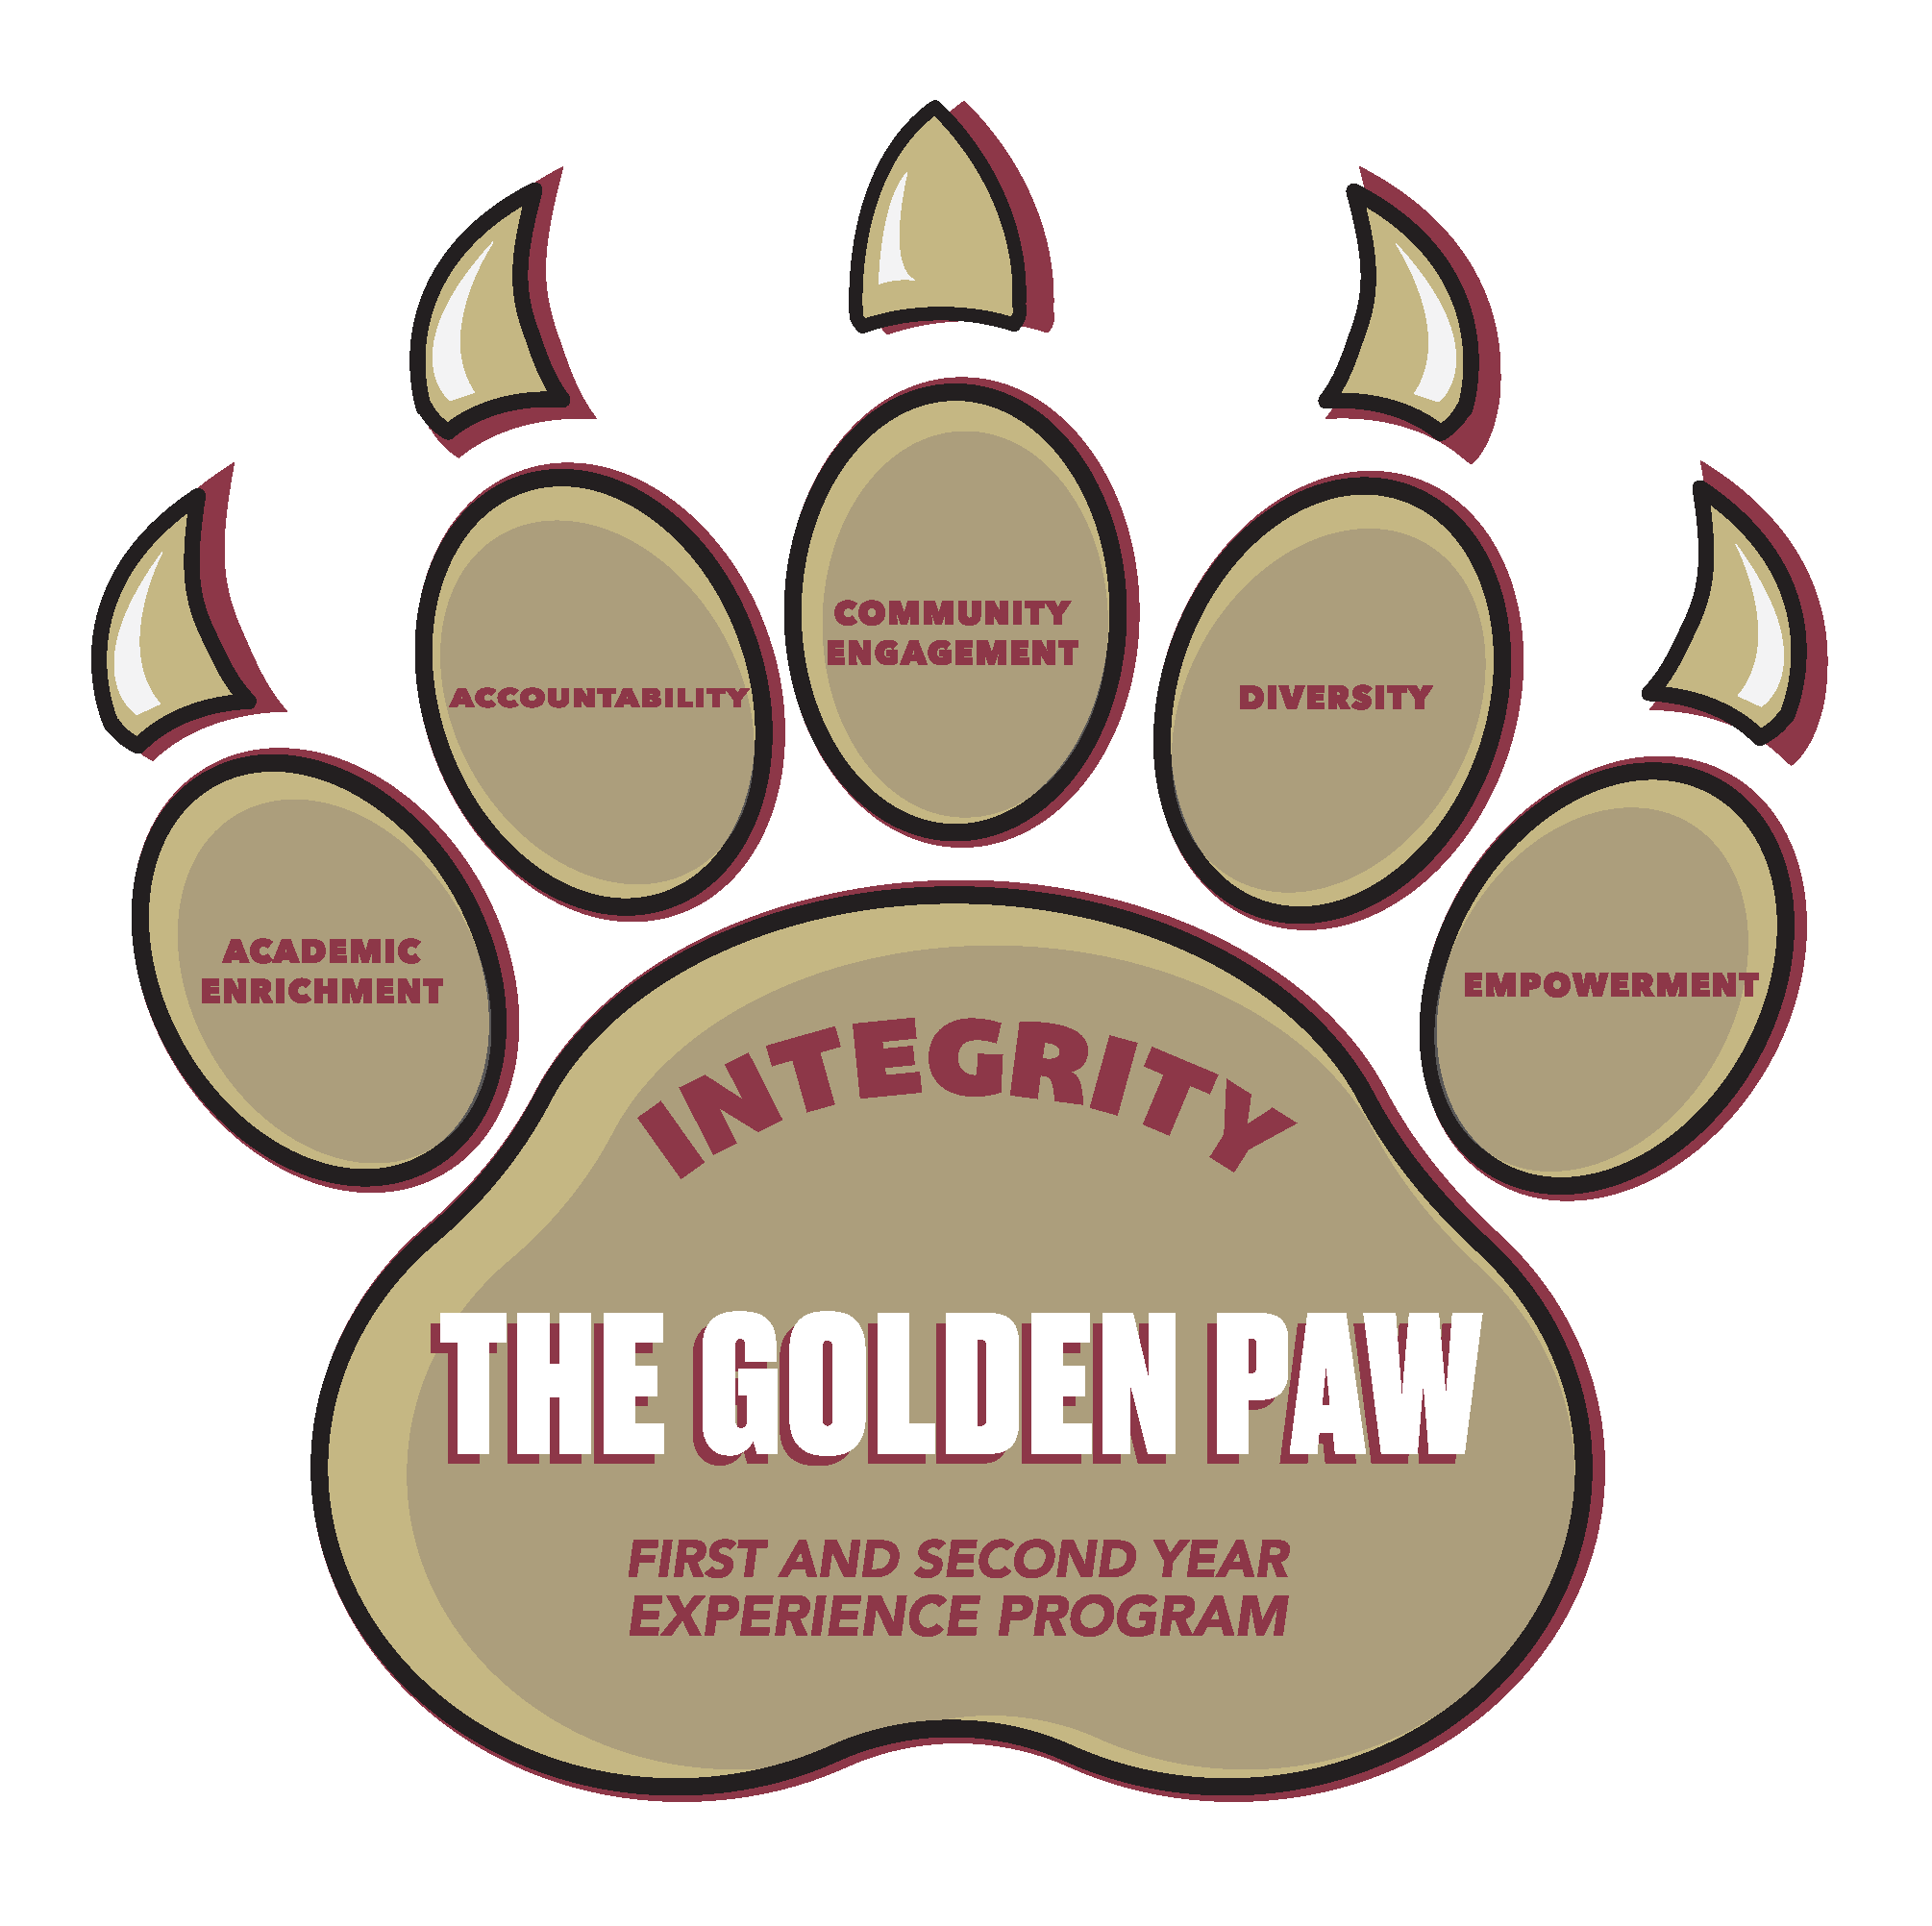 Logo for the Golden Paw Program, image in shape of paw print with "Academic Enrichment" "Accountability" "Community Engagement" "Diversity" "Empowerment" each on a pad of the paw print. In palm of paw print says "Integrity" above "The Golden Paw", with "First and Second Year Experience Program" below.